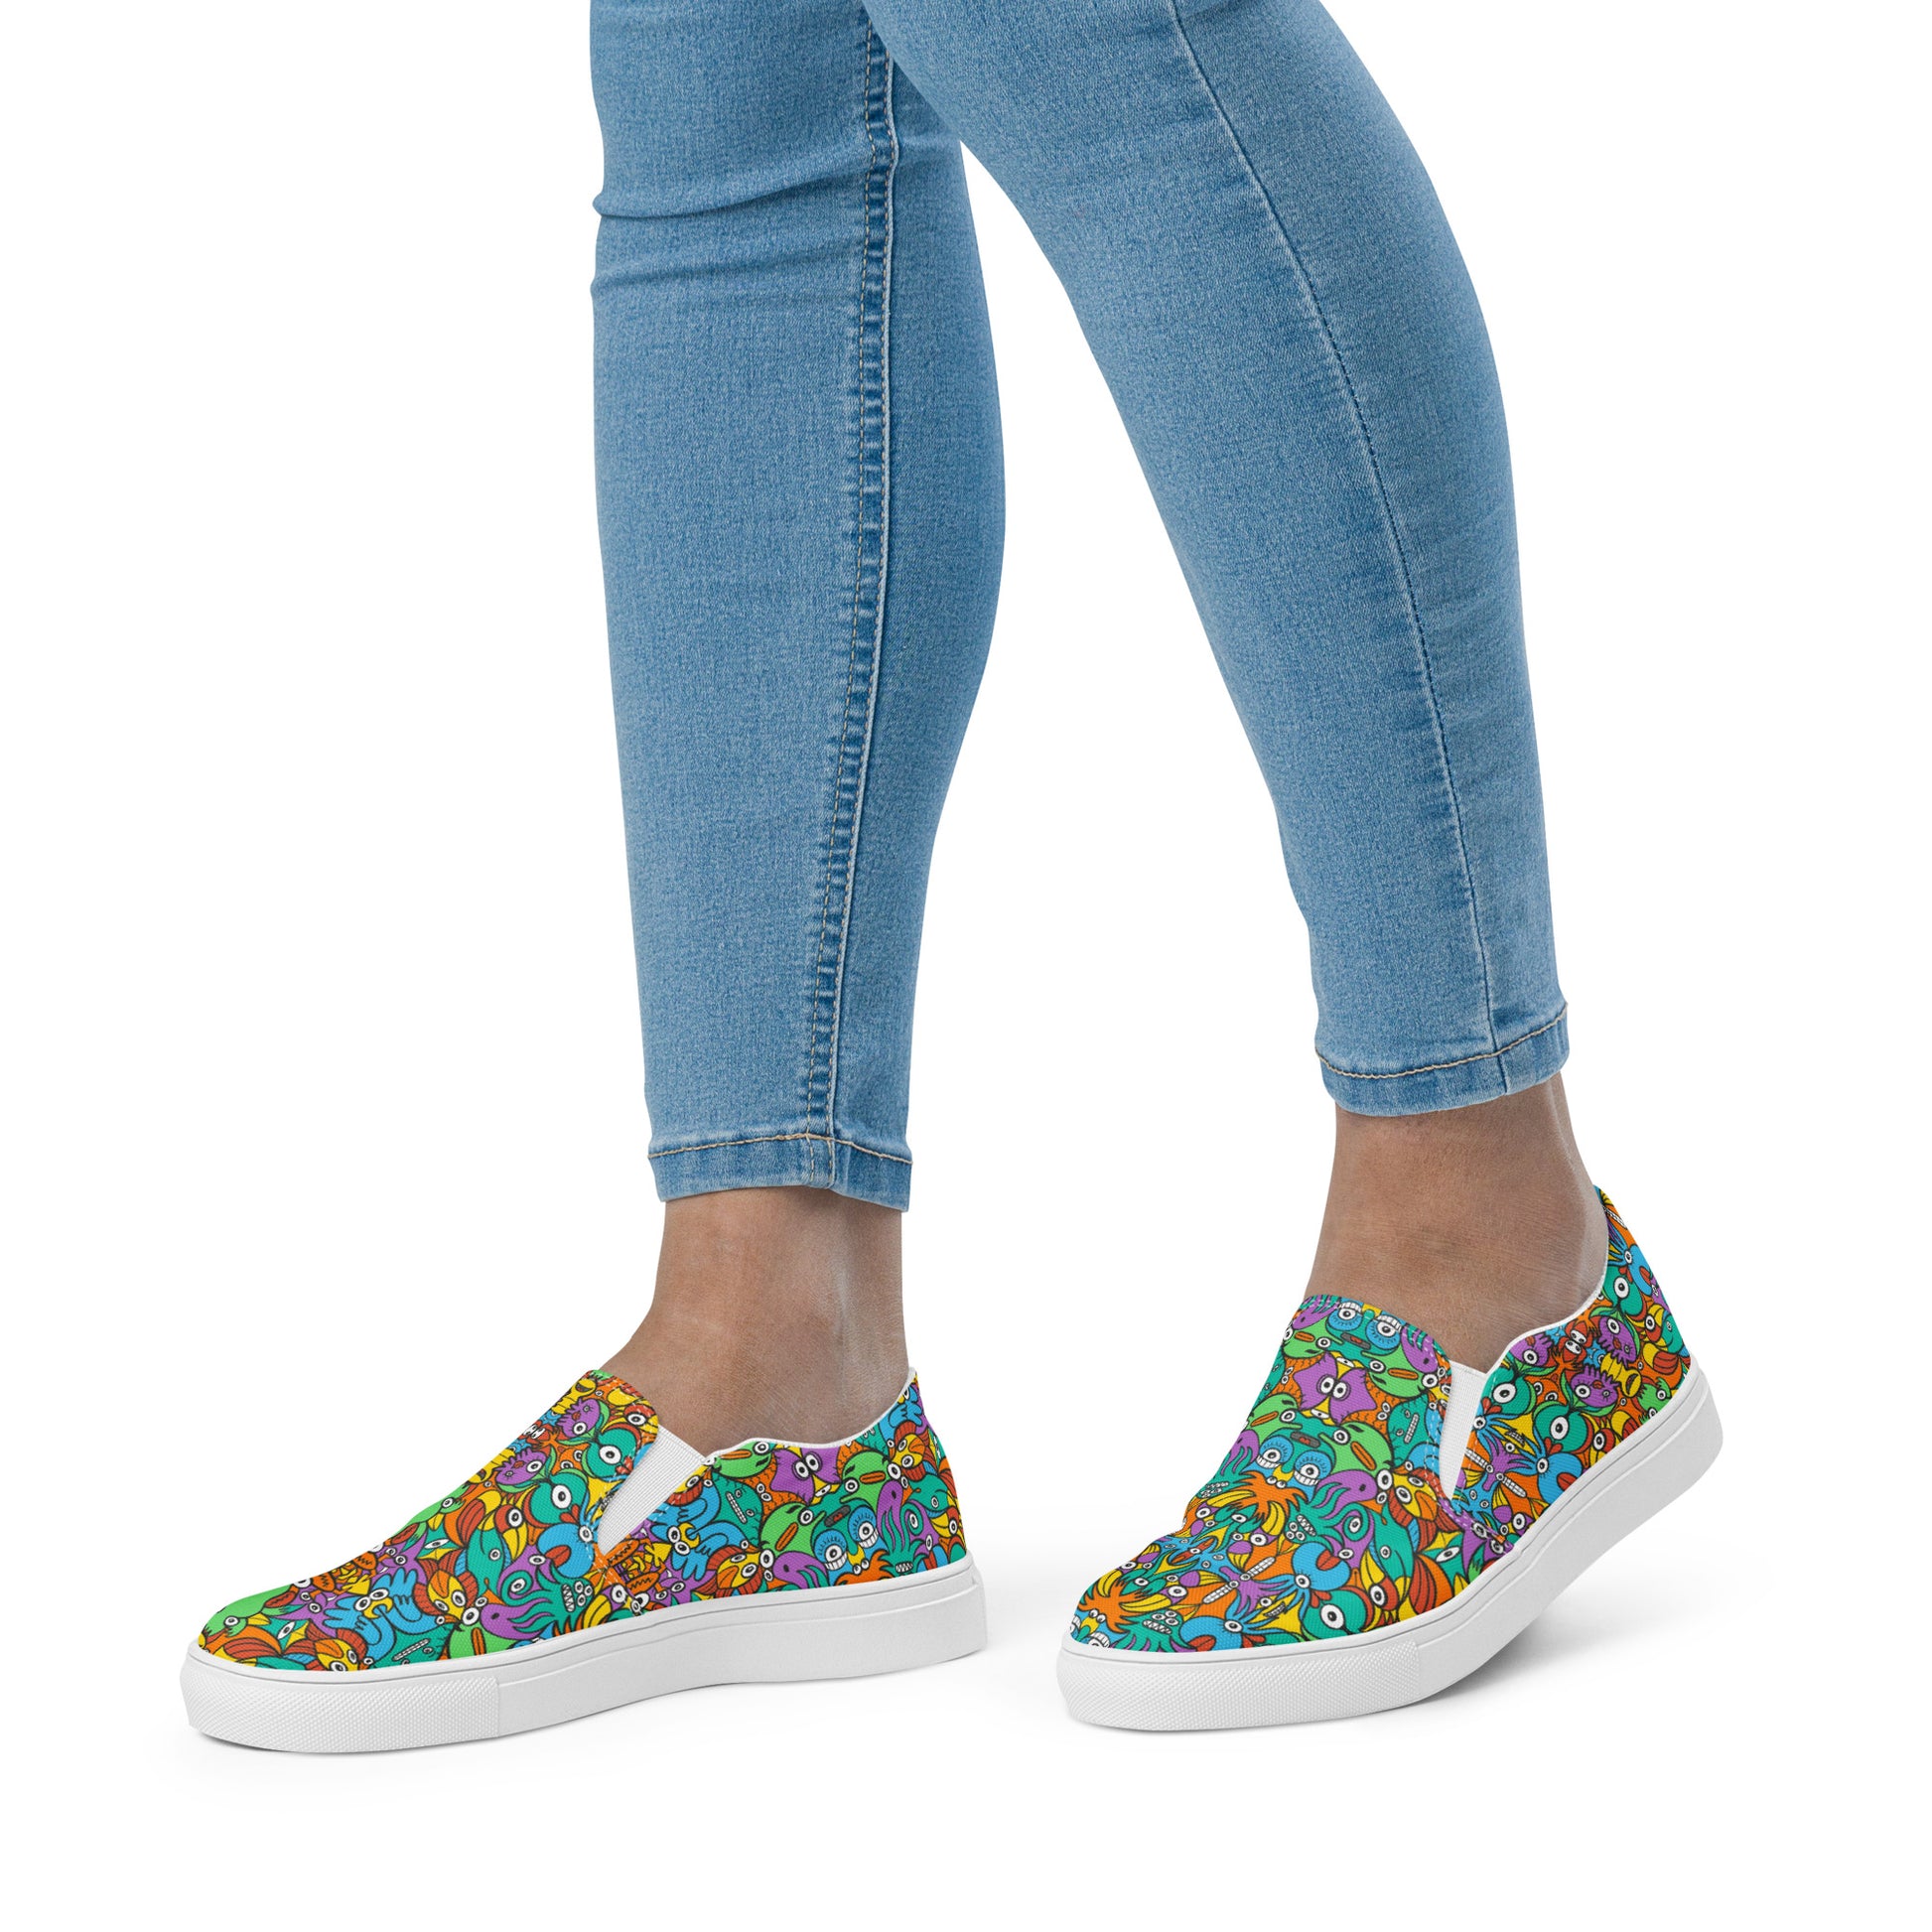 Fantastic doodle world full of weird creatures Women’s slip-on canvas shoes. Lifestyle